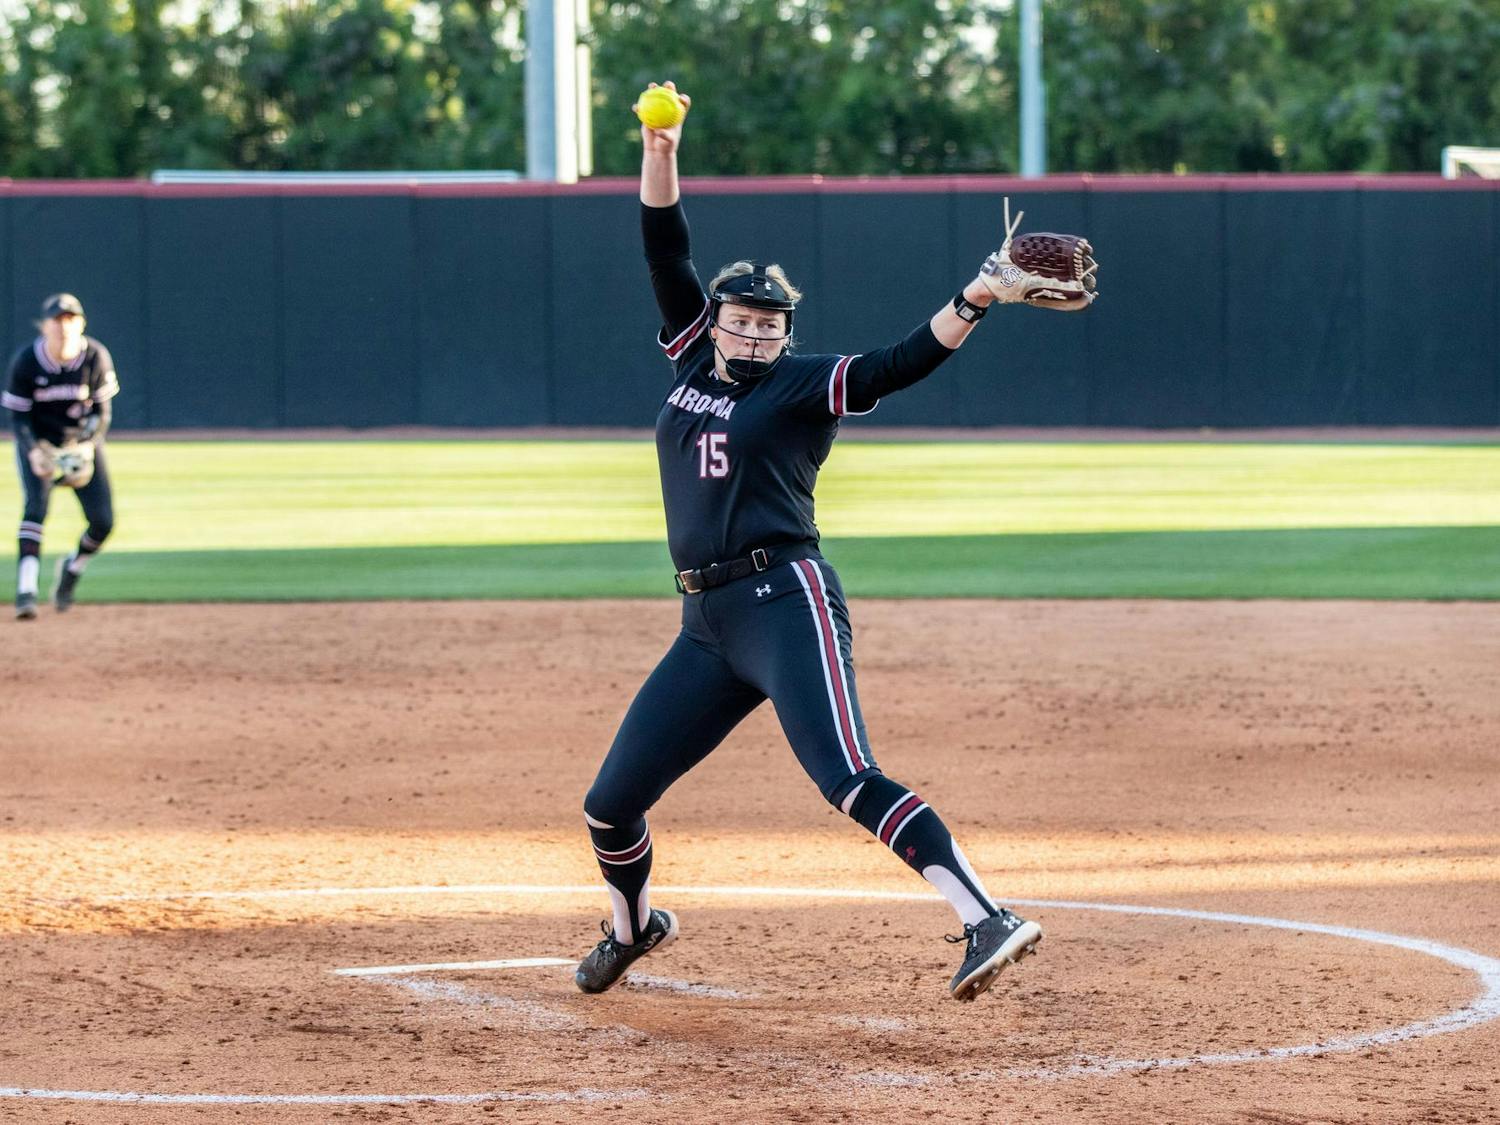 Fifth-year pitcher Alana Vawter winds up a pitch during South Carolina's game against Arkansas at Beckham Field on April 12, 2024. Vawter faced 29 batters in the ɫɫƵs' 4-3 loss to the Razorbacks.